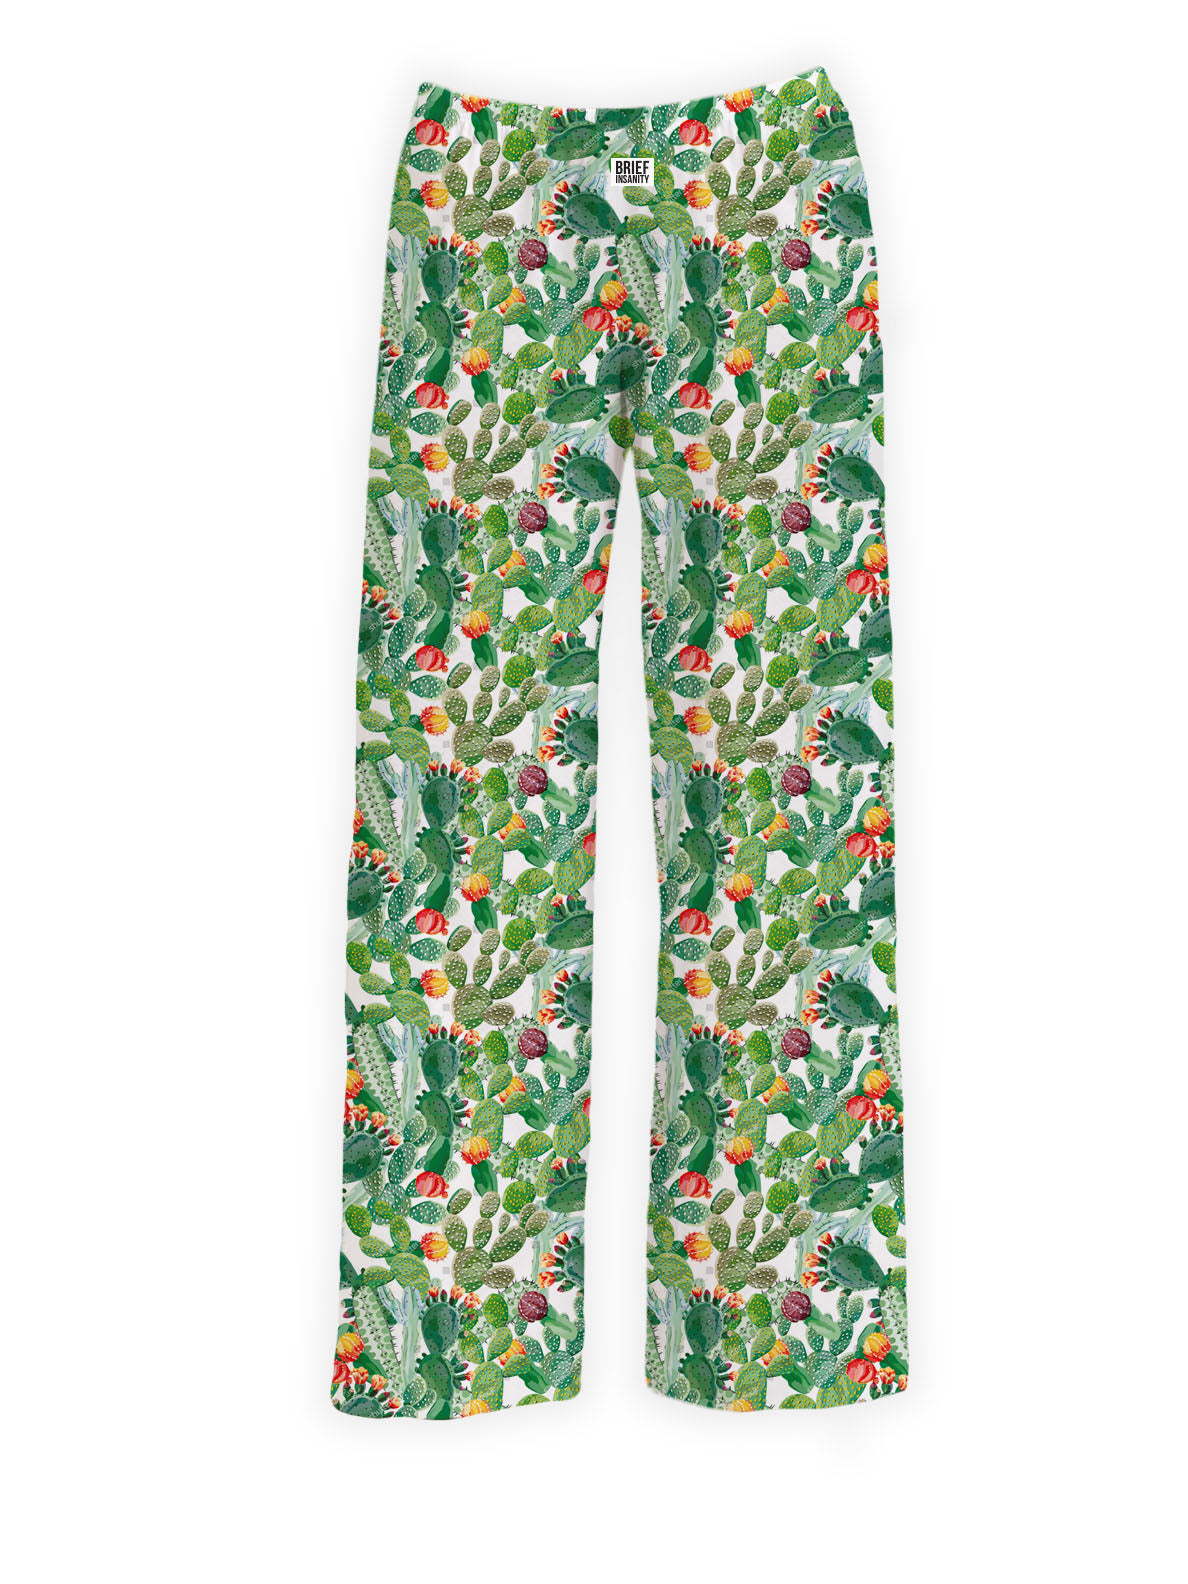 Buttery Soft Pajama Pants for Women – Artistic Colorful Cactus